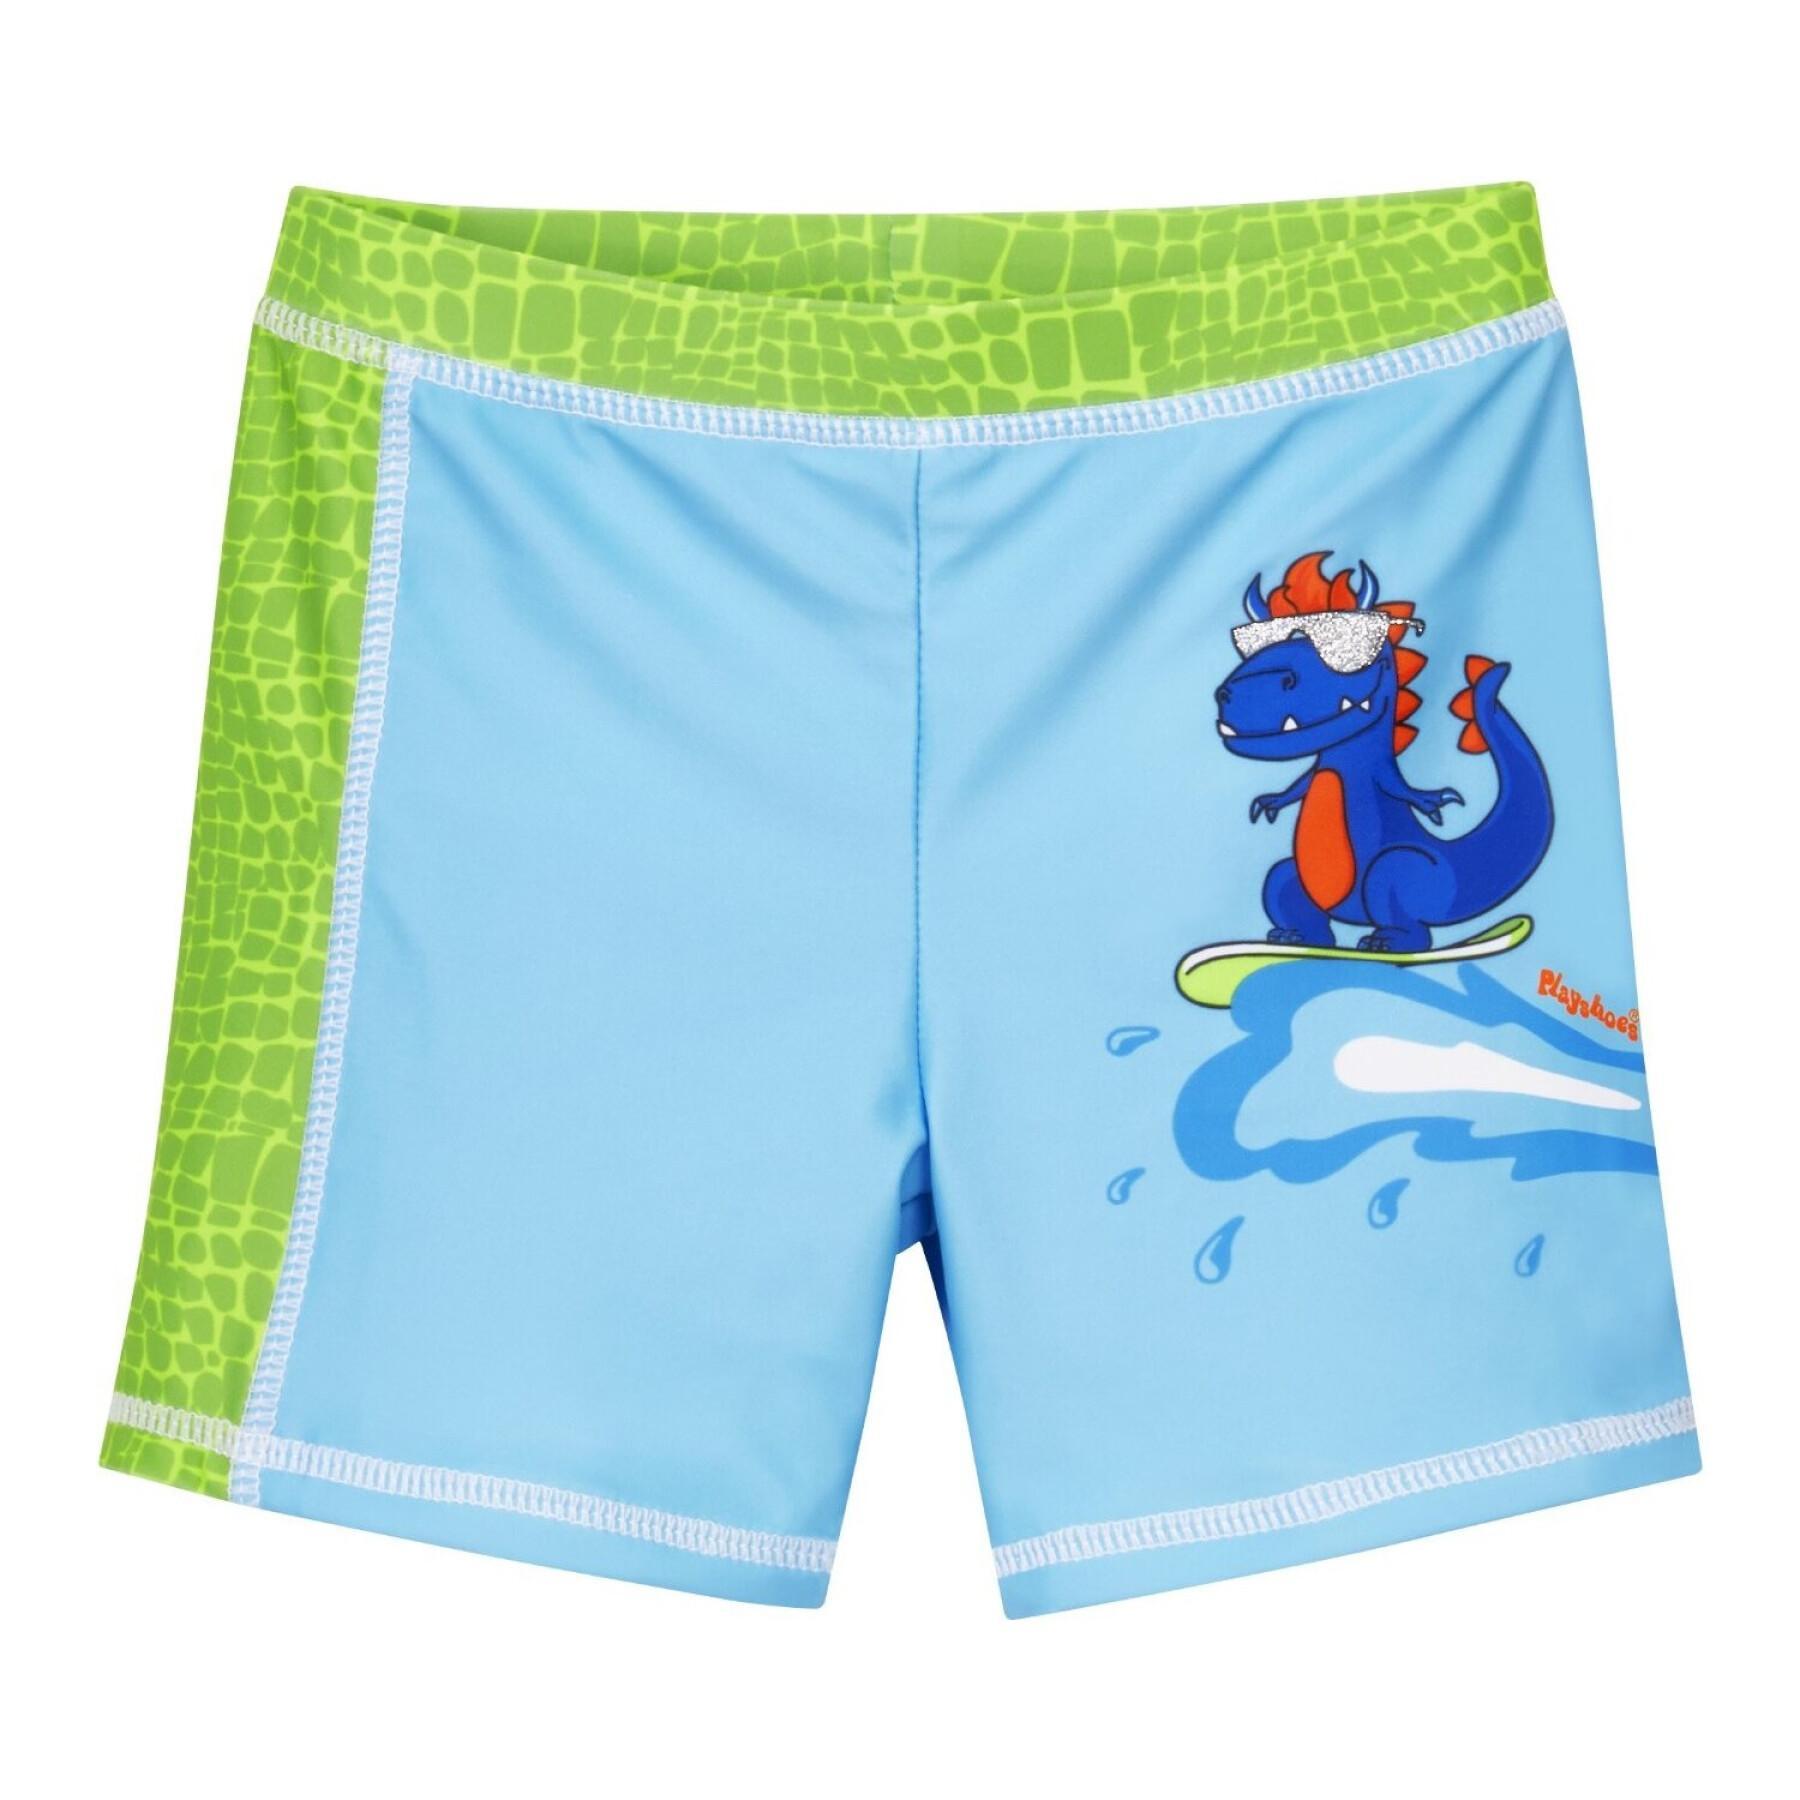 Baby swim shorts with uv protection Playshoes Dino